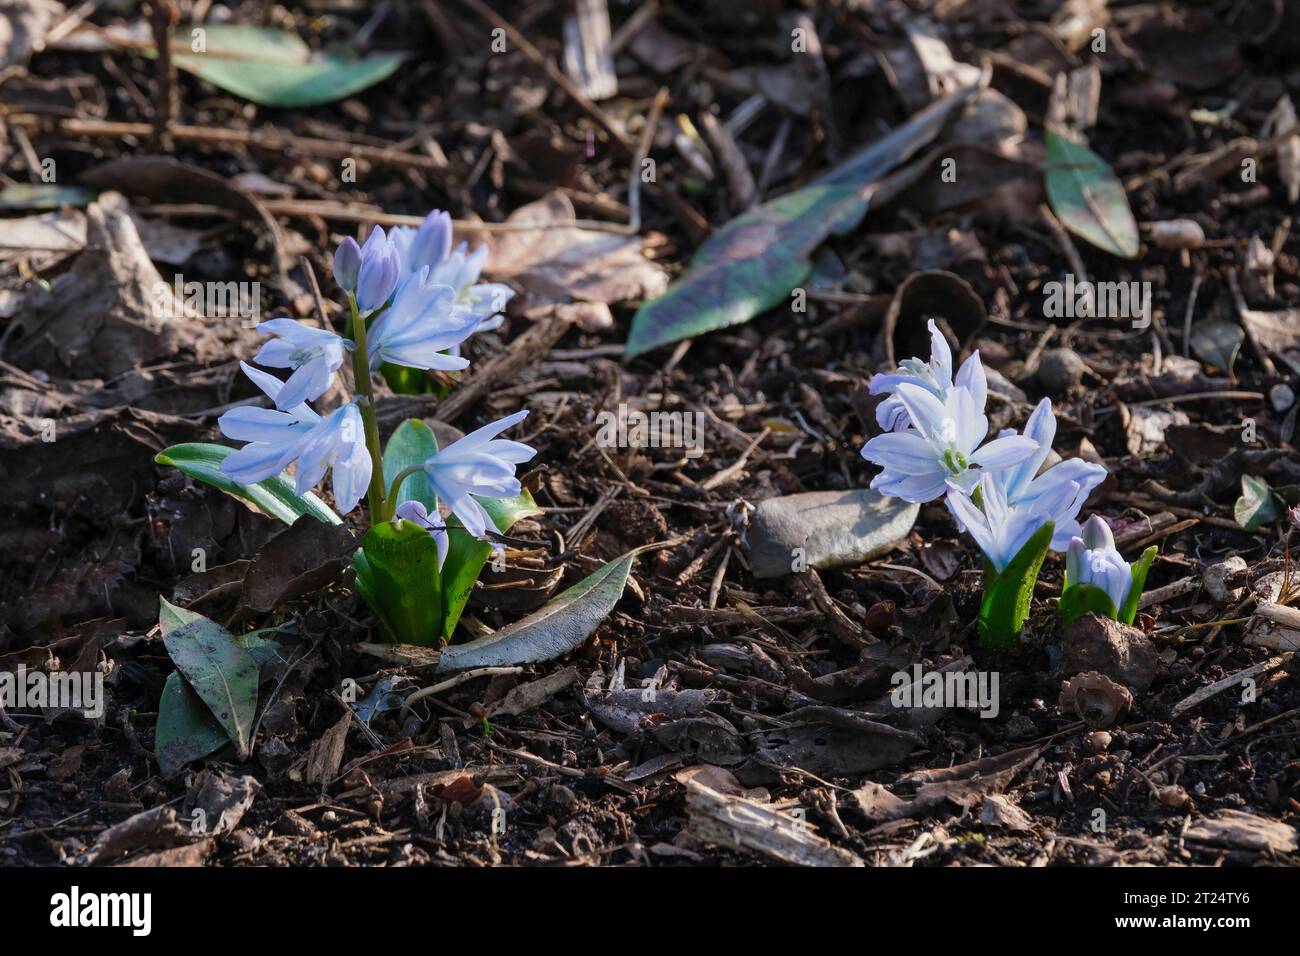 Scilla mischtschenkoana Tubergeniana, bulbous perennial, pale blue flowers in late winter/early spring Stock Photo